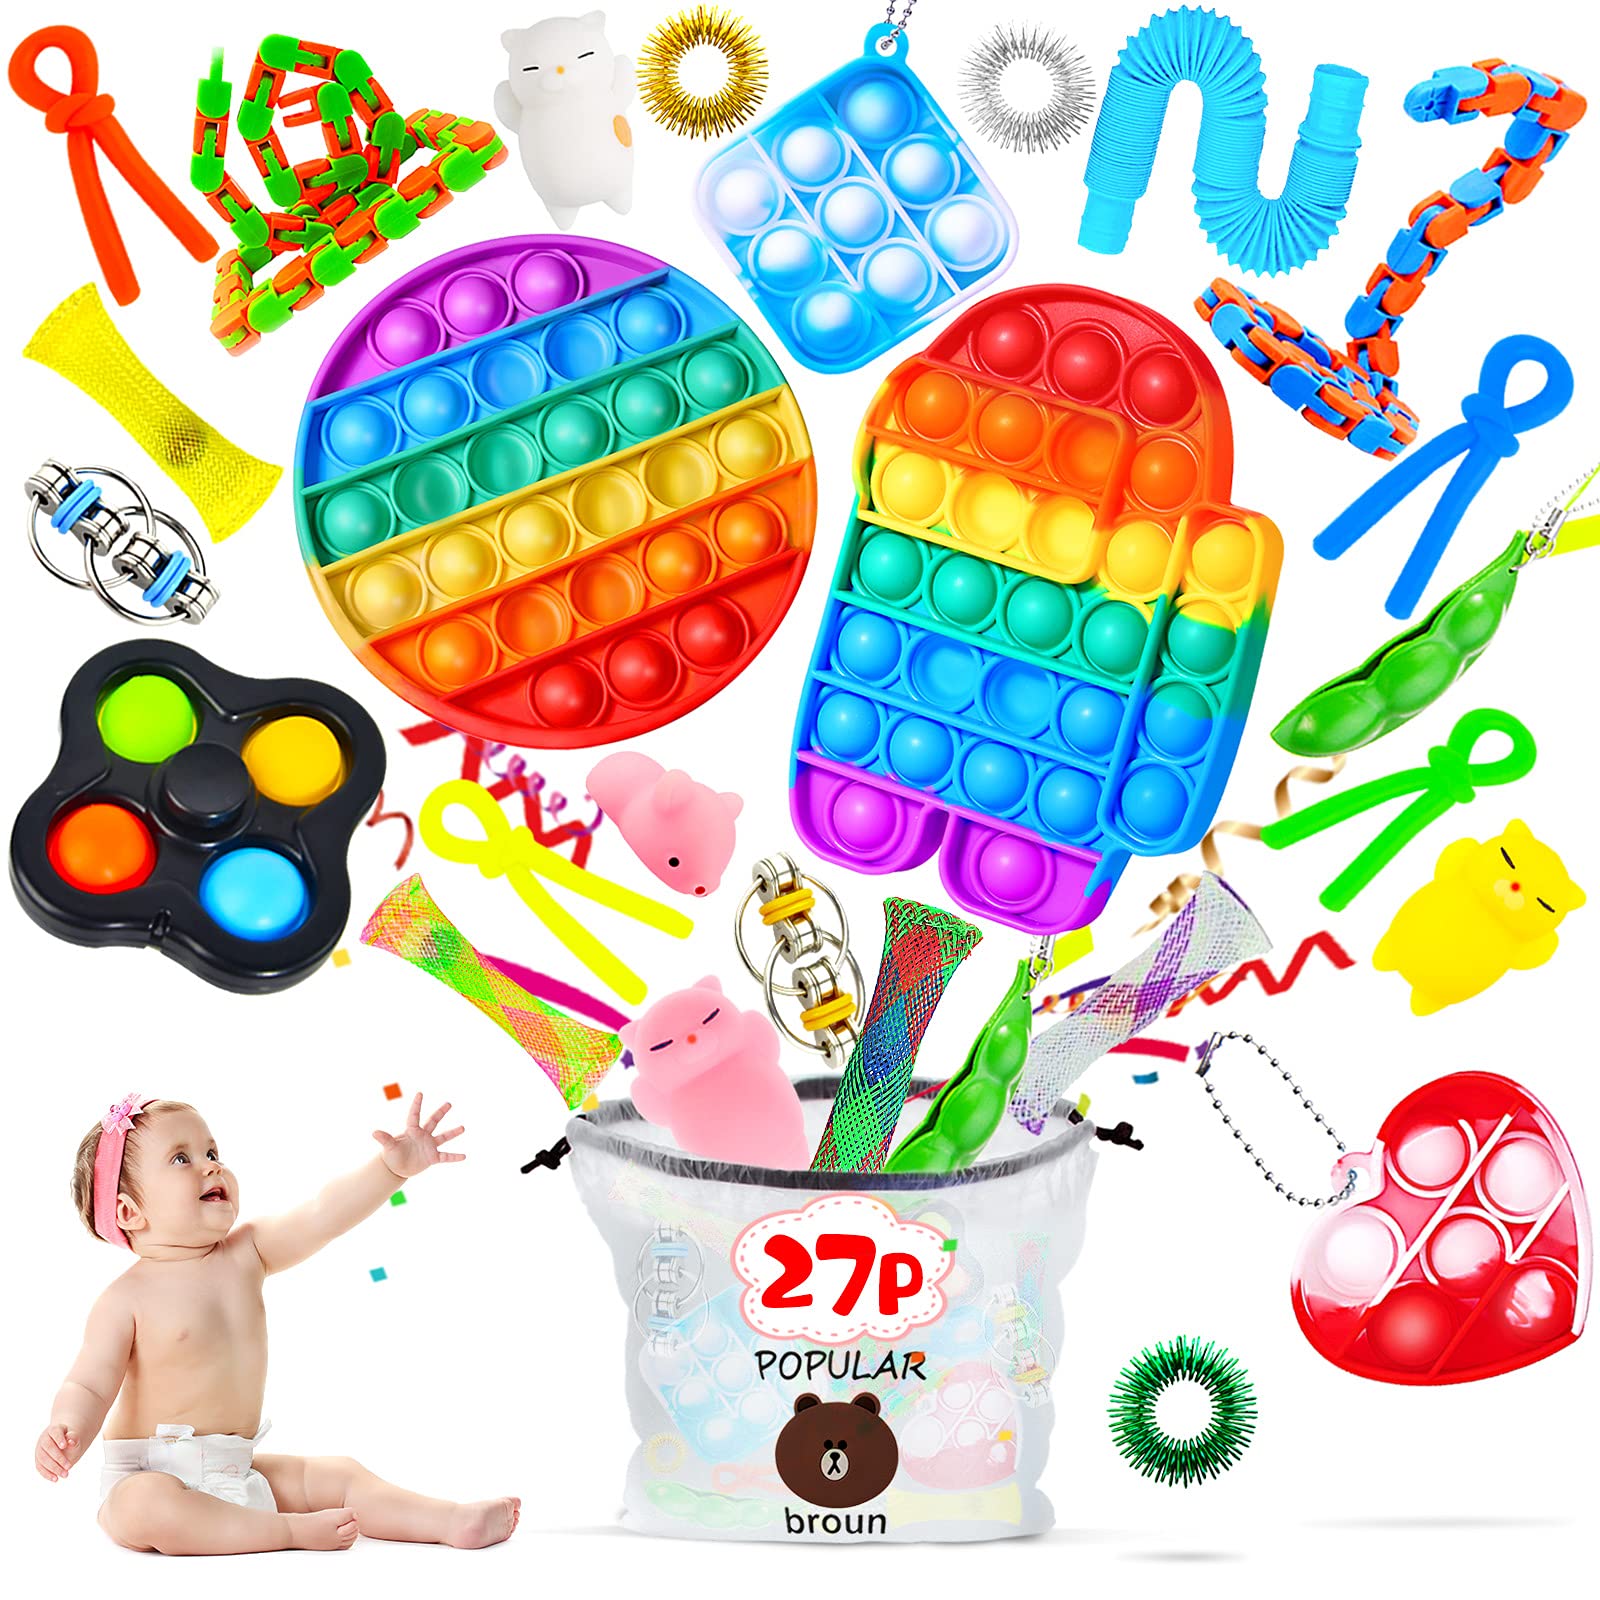 SHARLOVY Fidget Toy Pack Pop 27P Sensory Squeeze Figet Toys Packages Fidget Kit Box Figetsss Toys Sets Fidgets for Girls 10-12 Boys Toddlers ADHD Autism Kids